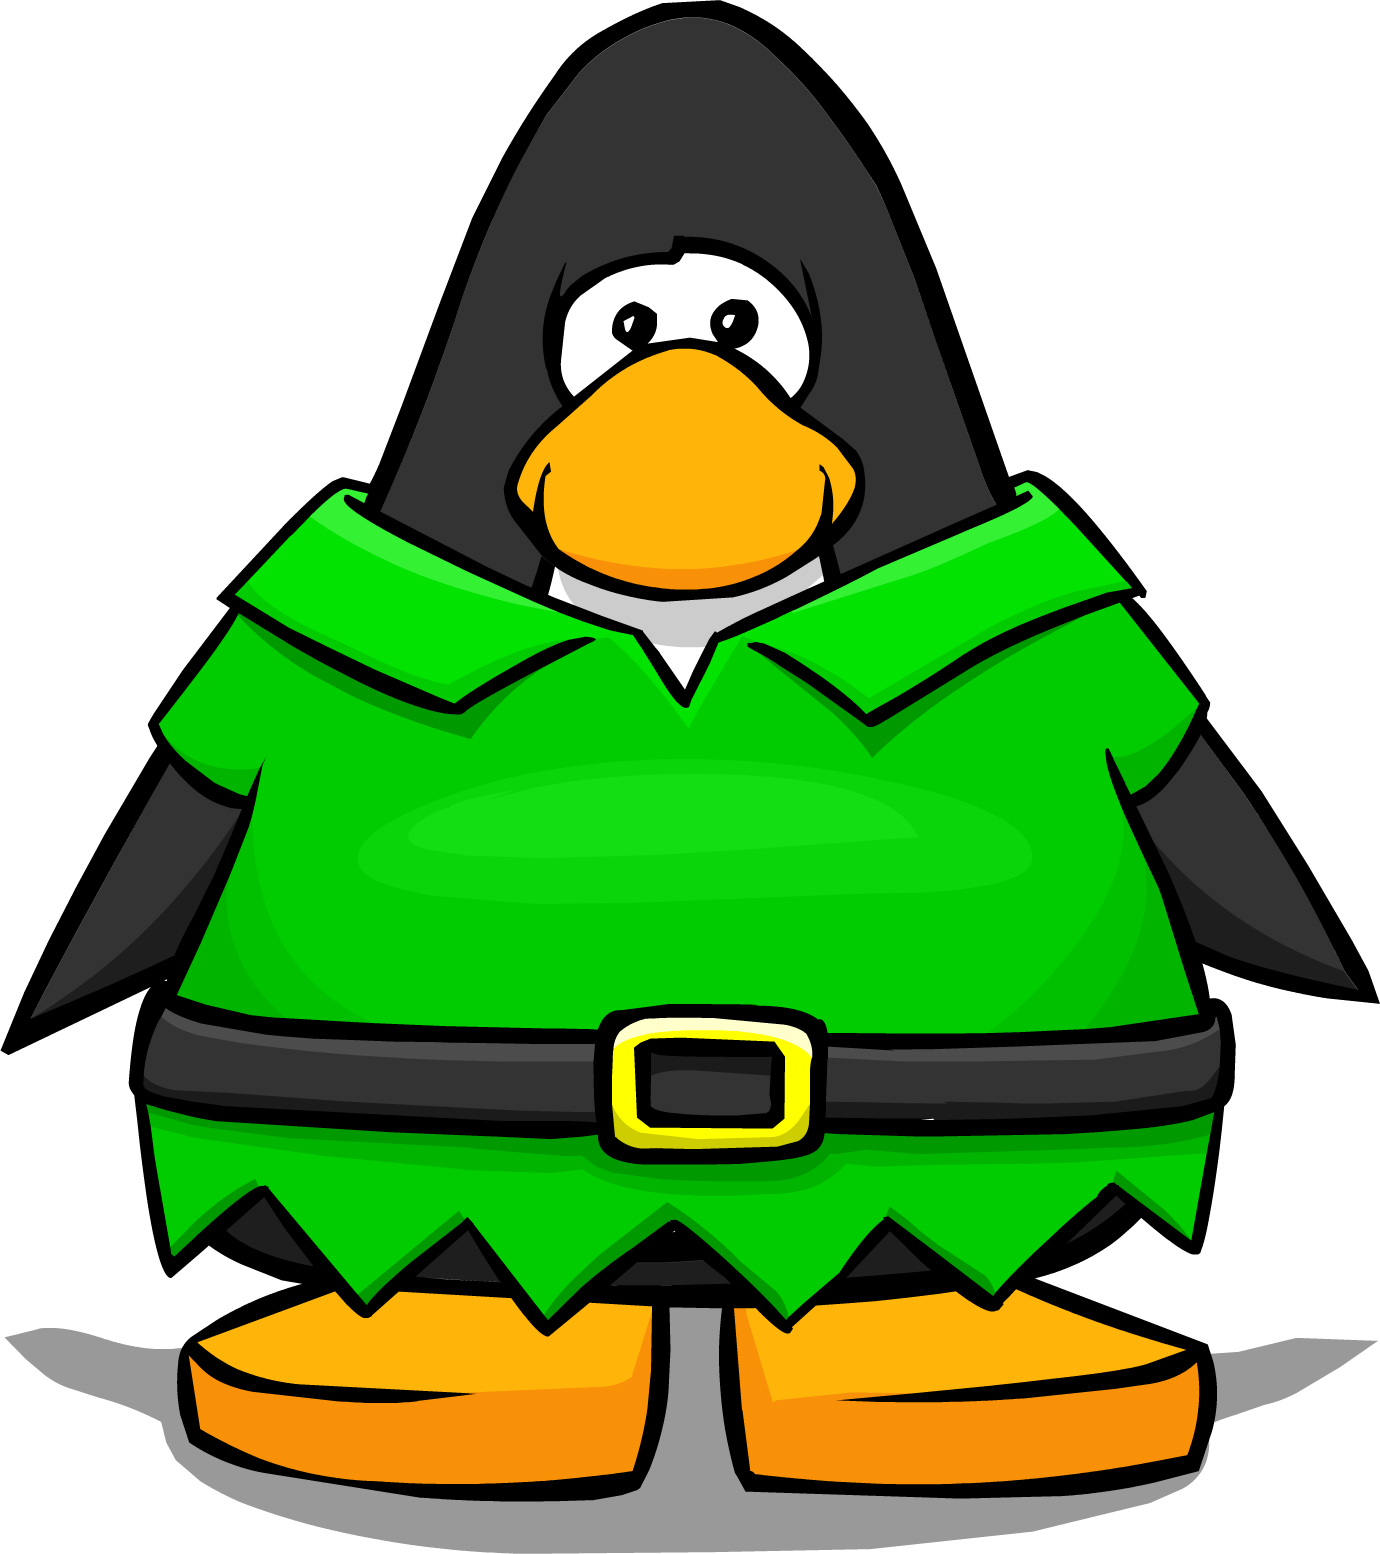 Elf Suit From A Player Card - Club Penguin Blue Boa (1380x1554)